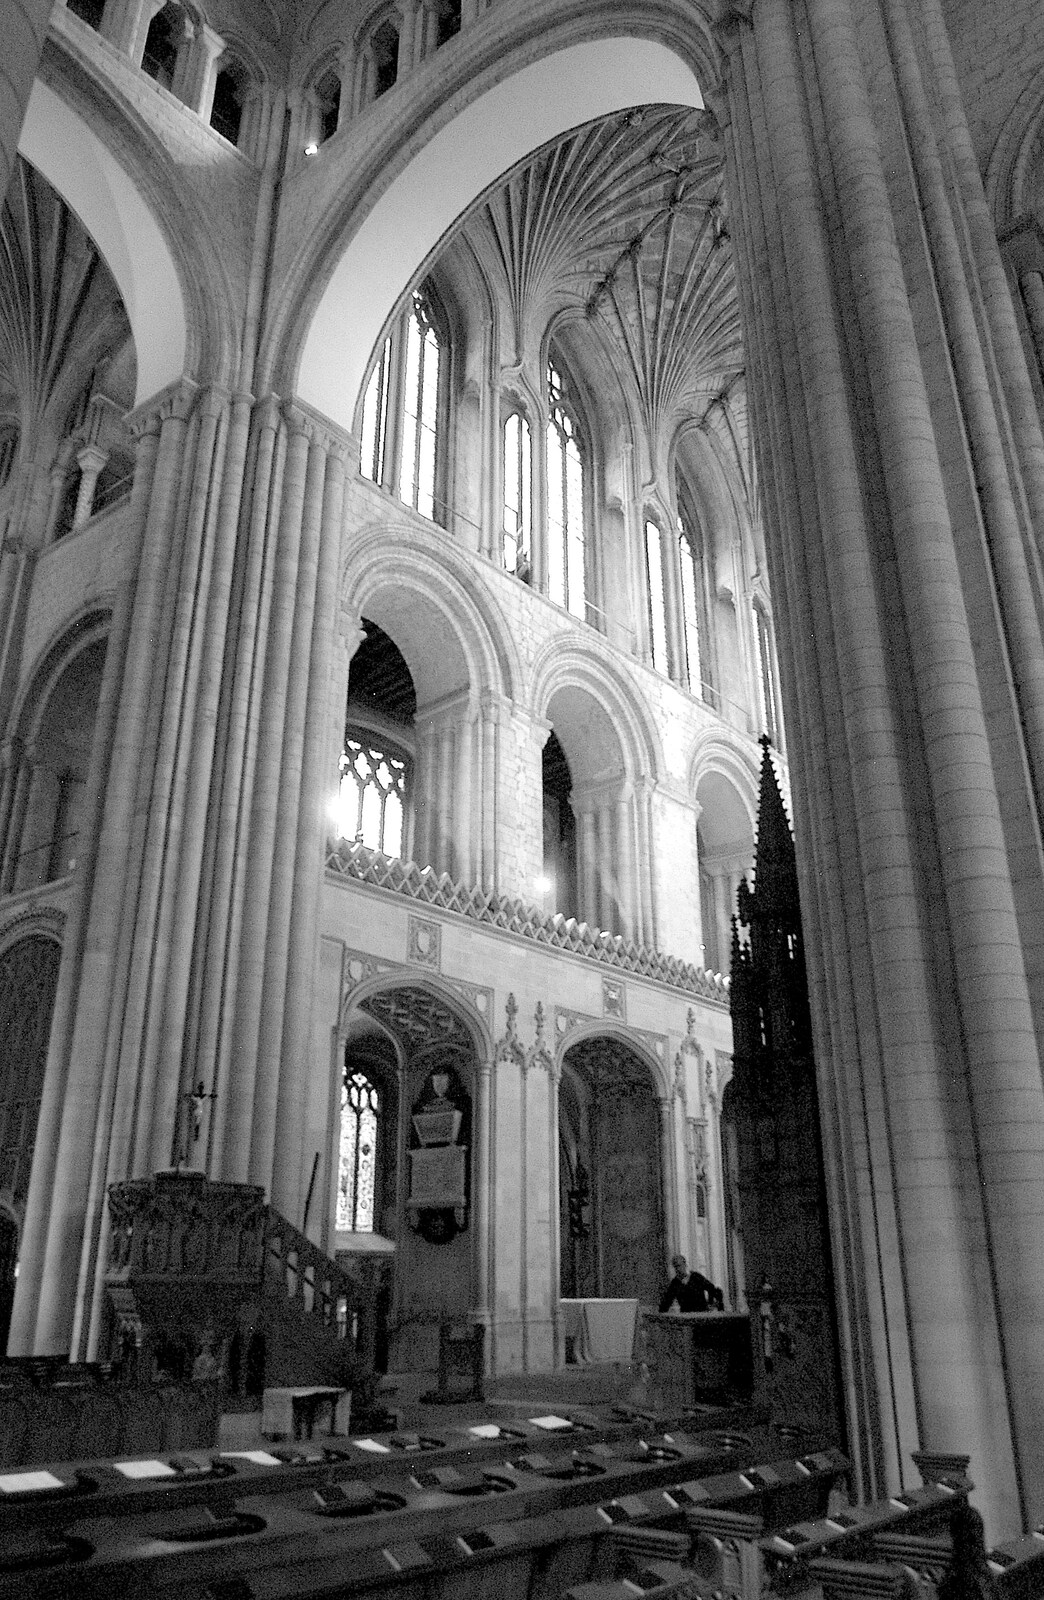 Under the tower in Norwich Cathedral from Spiders, Norwich Science Festival and Kingston Arms Music - 5th September 2006